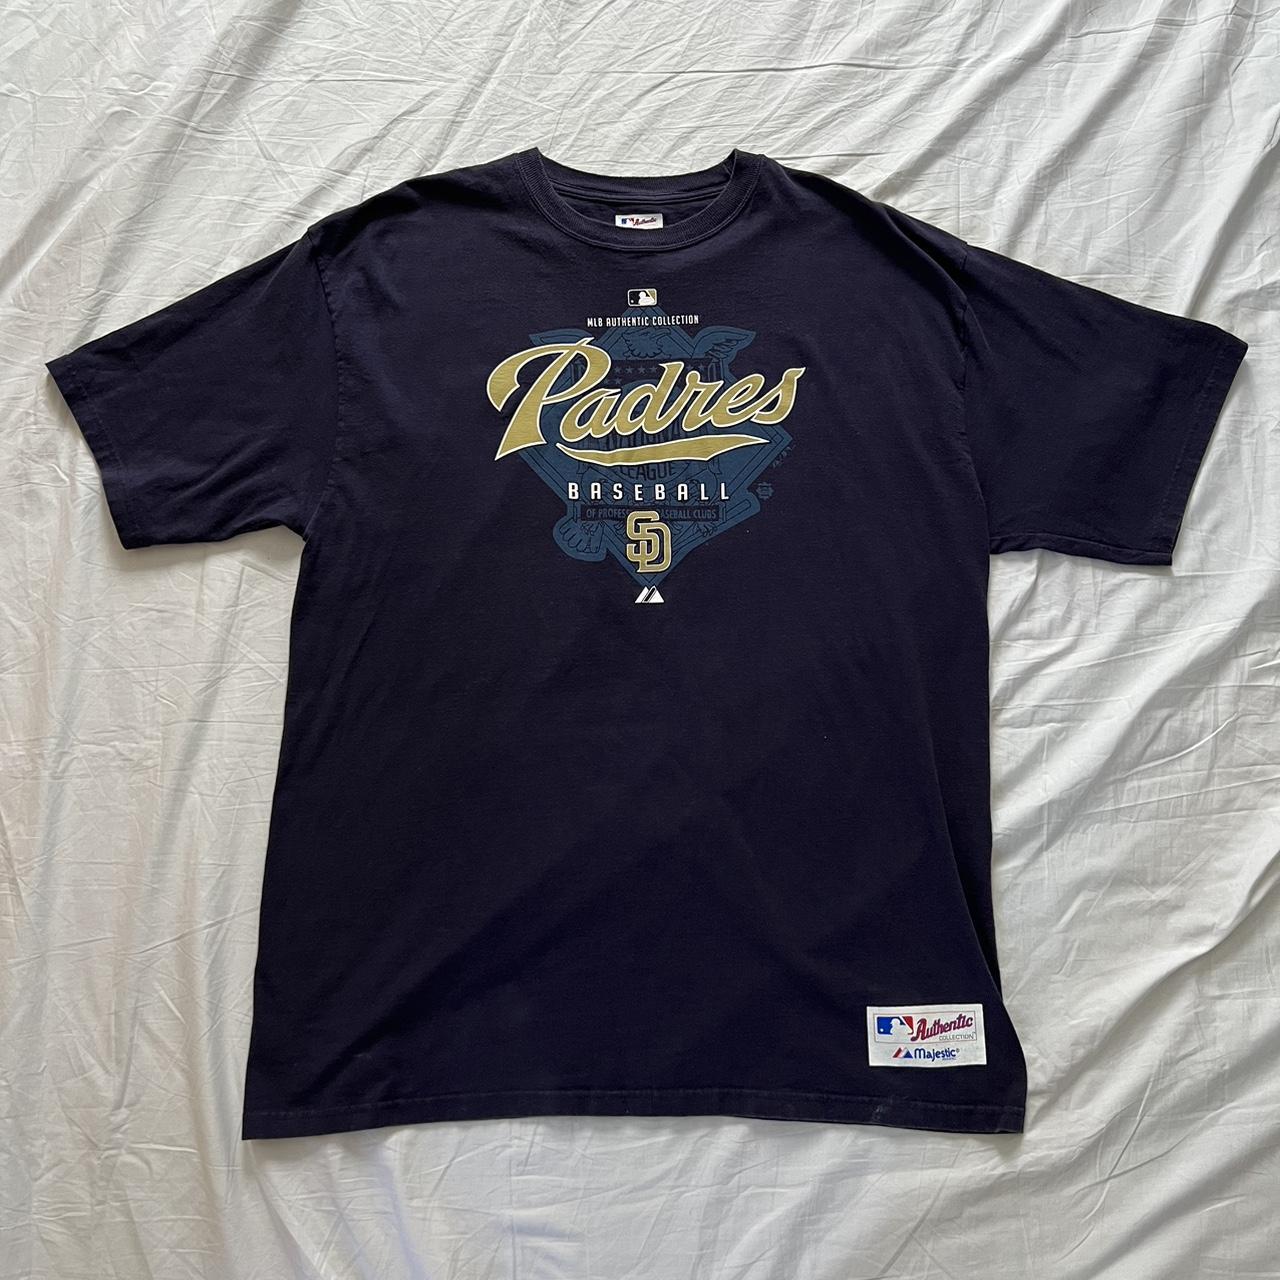 MAJESTIC Men's Majestic Navy/White San Diego Padres Authentic